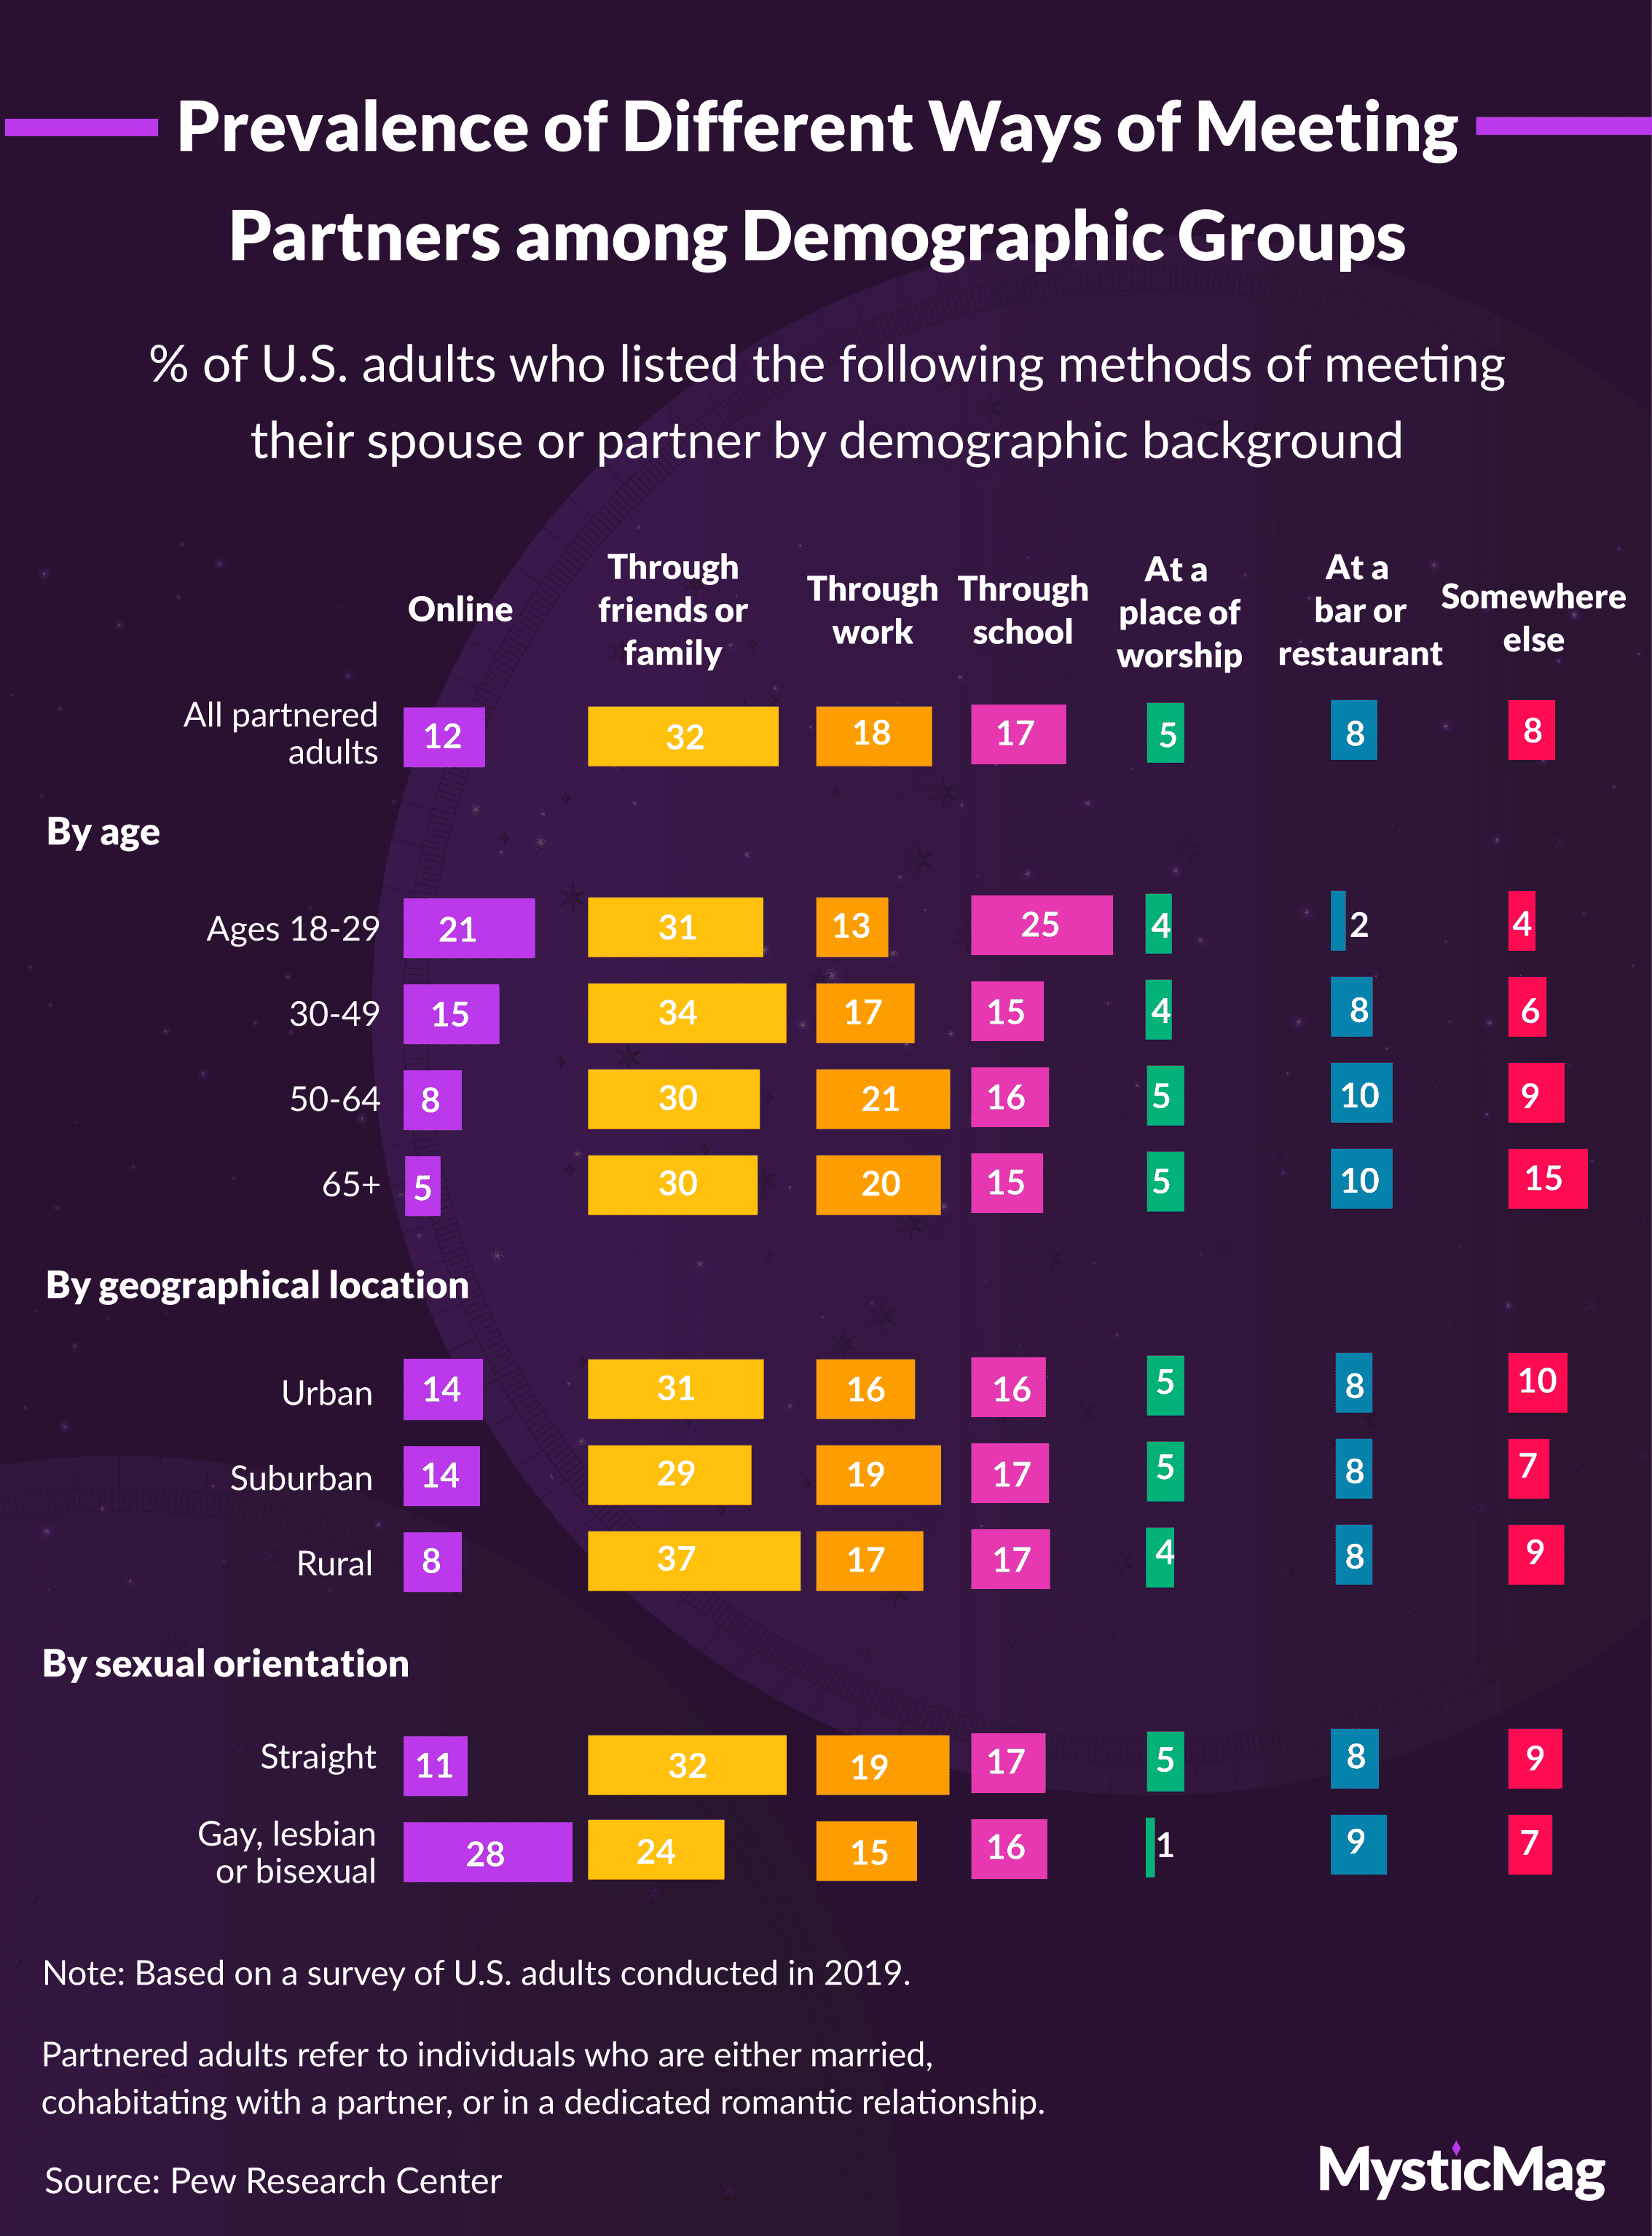 Prevalence of different ways of meeting a partner by demographics